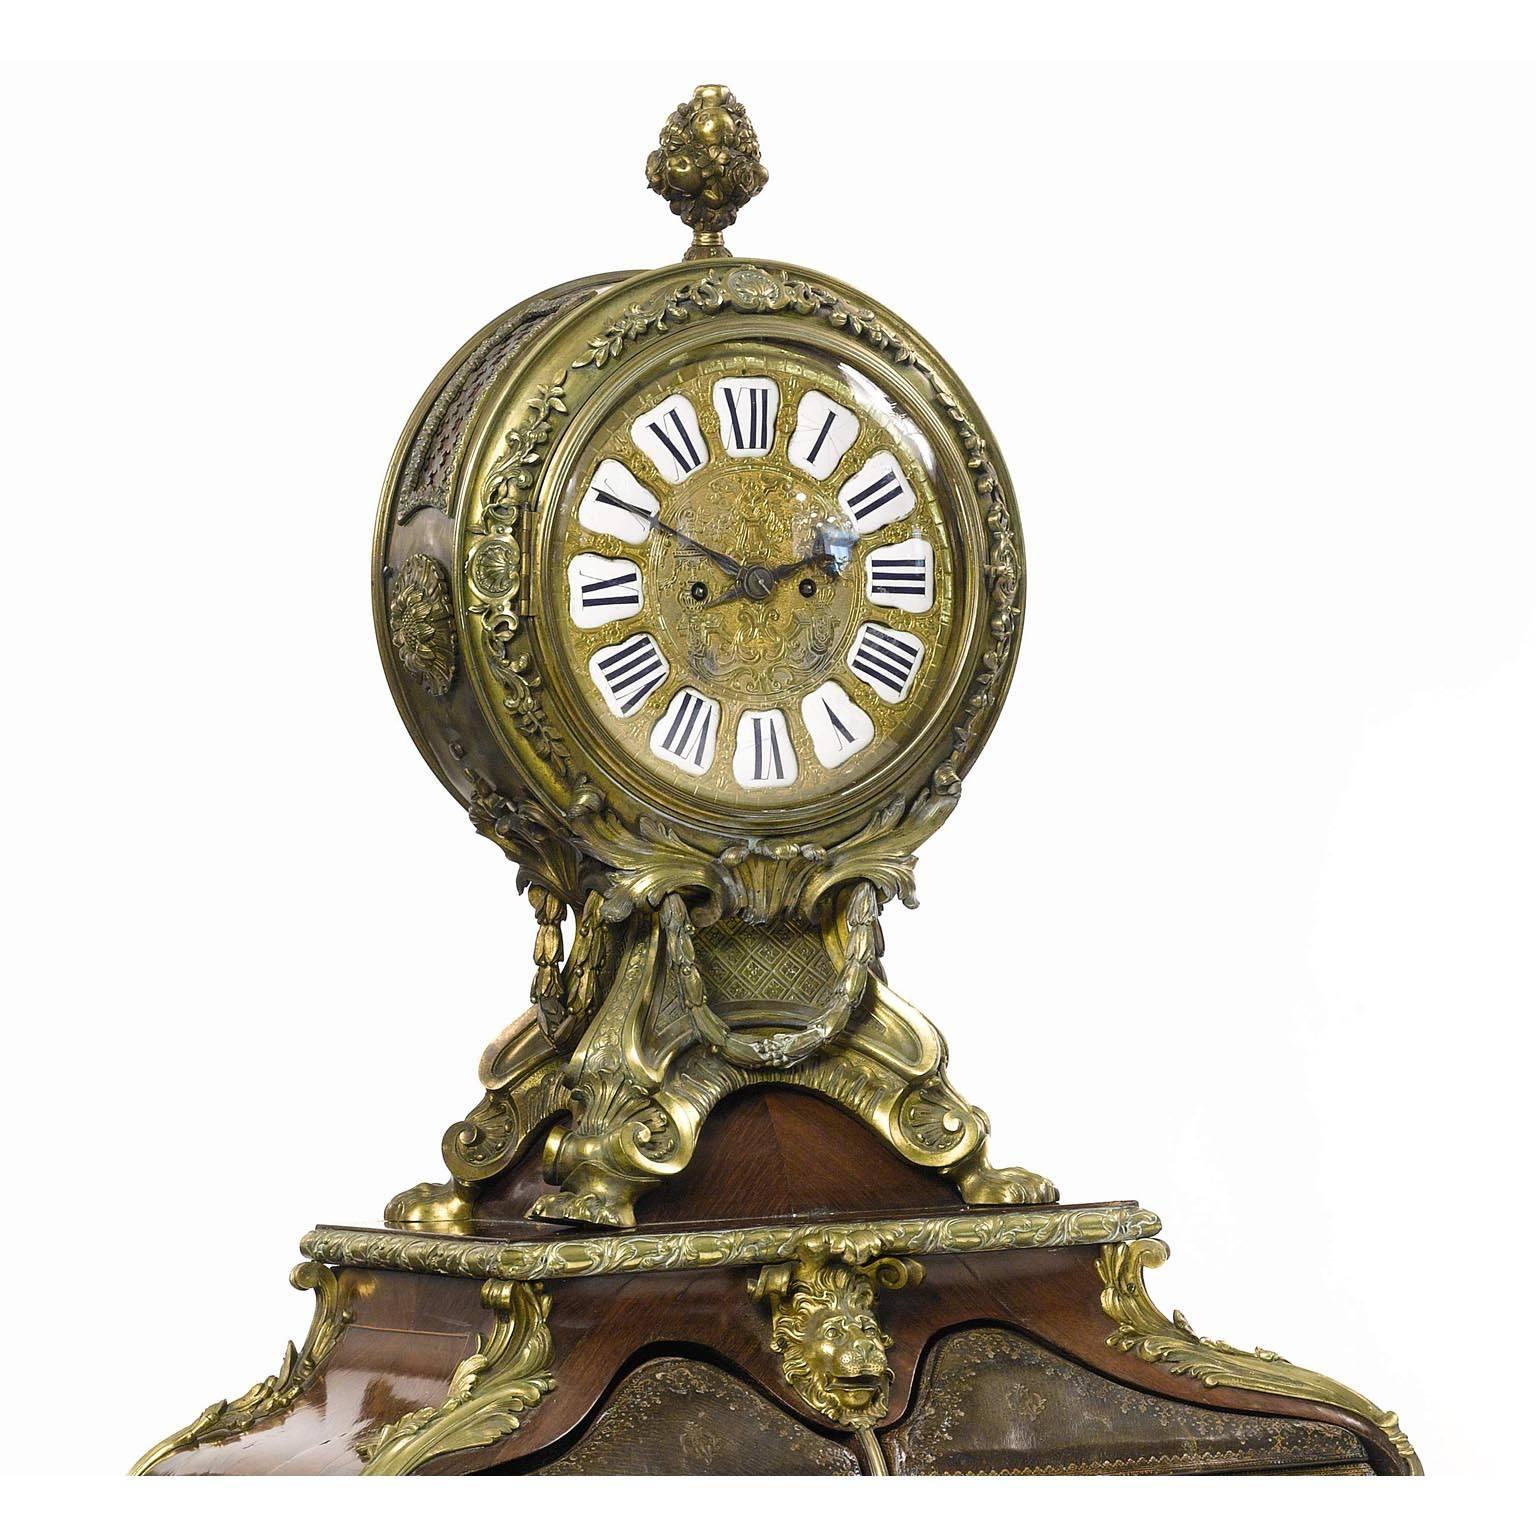 A very fine and palatial French 19th century Louis XV style gilt bronze mounted, leather, tulipwood and kingwood parquetry cartonnier with clock. The circular clock with elaborate pierced case with reticulated panels backed with silk lining, floral